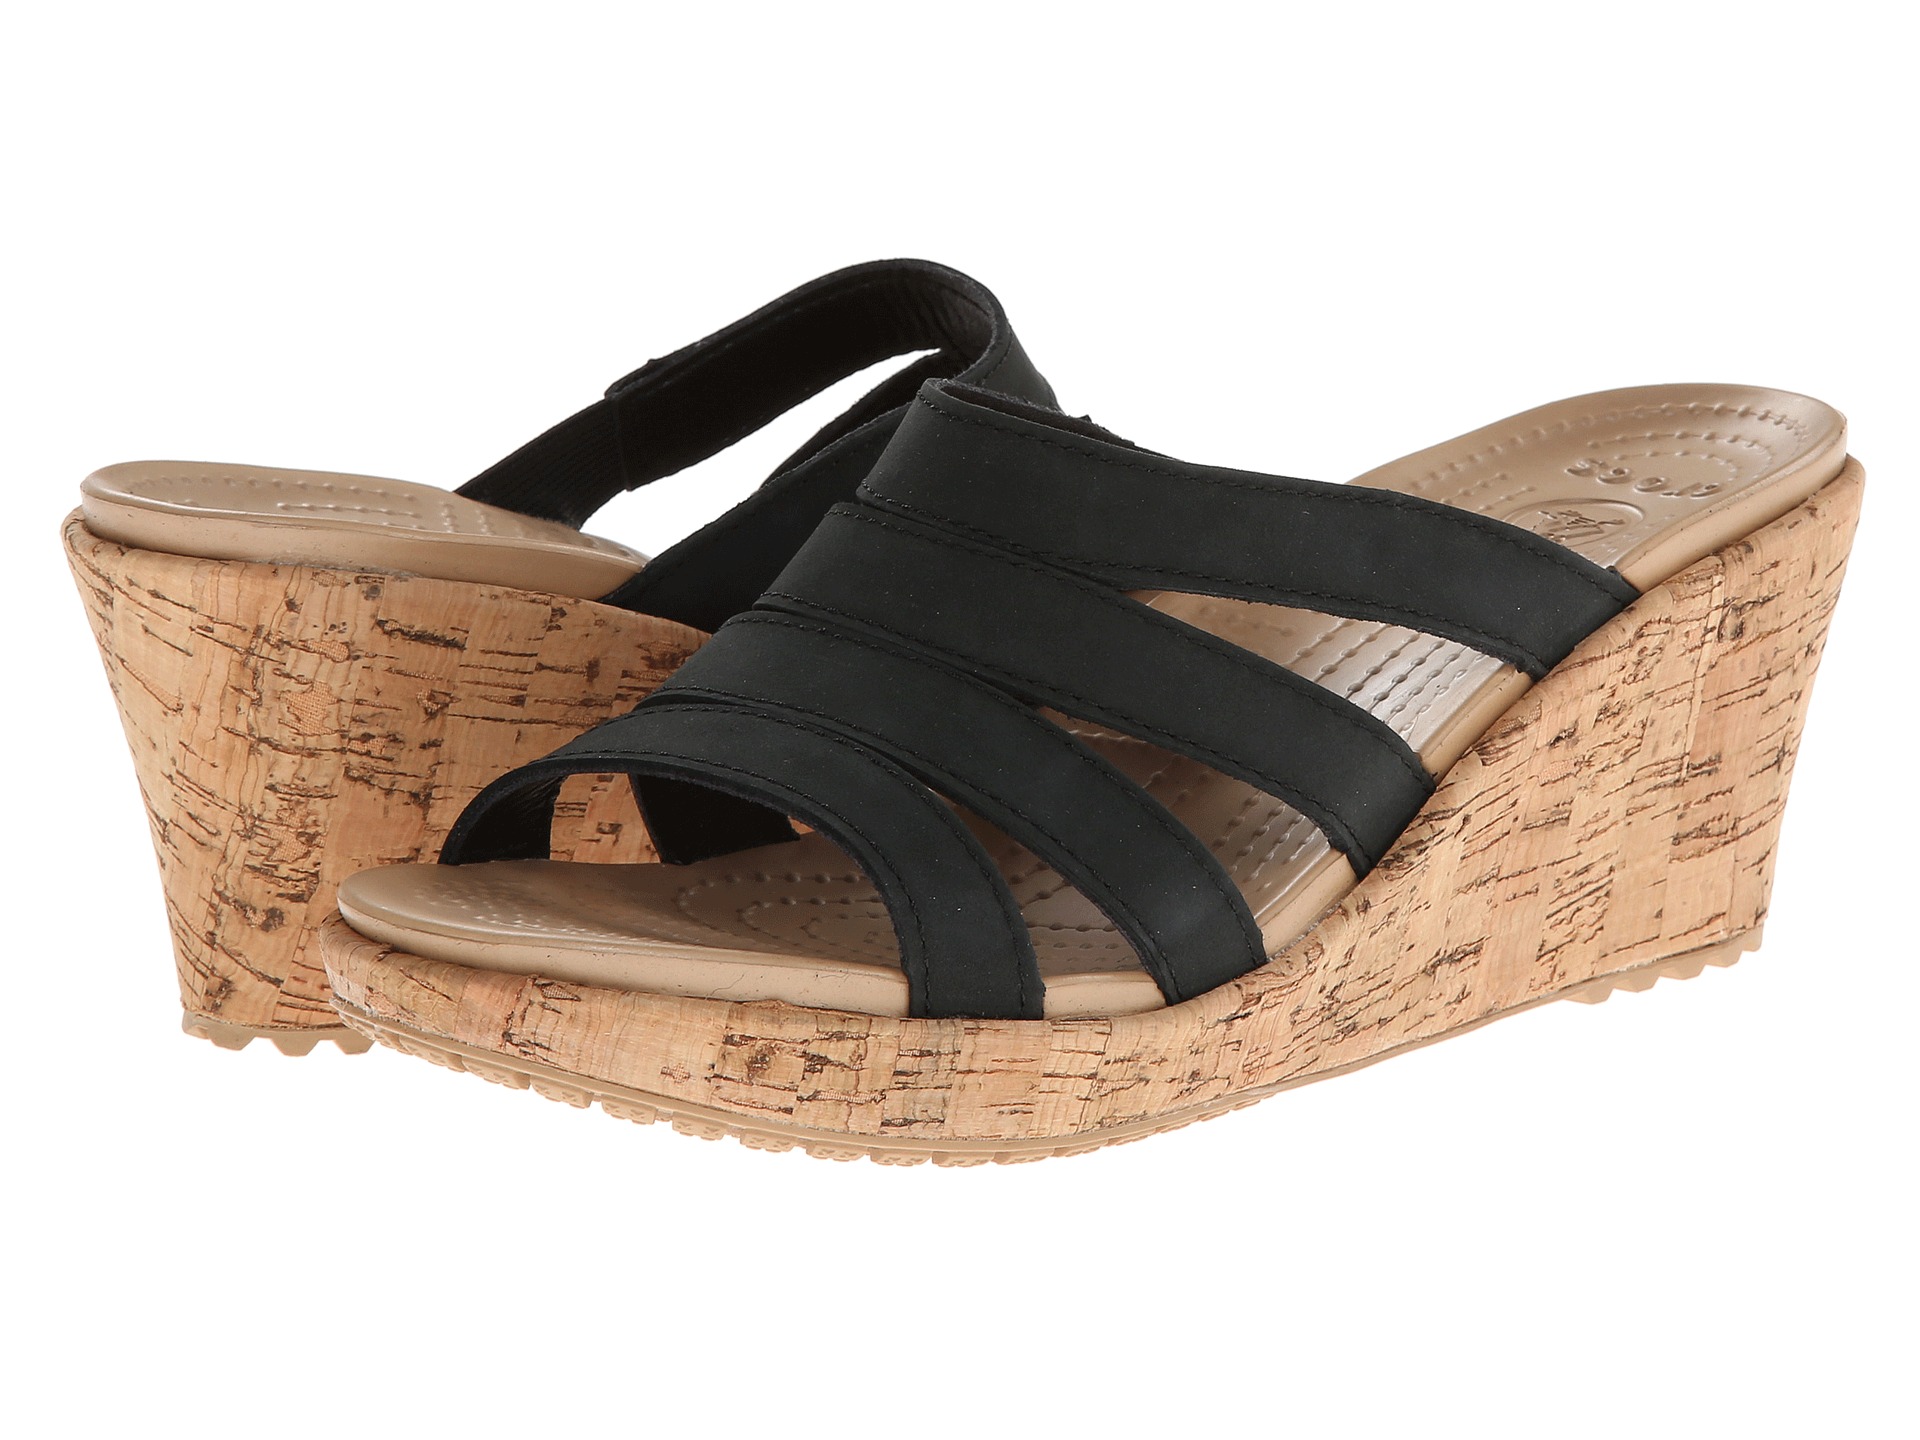 Crocs A Leigh Cork Wrap Wedge Black Gold | Shipped Free at Zappos